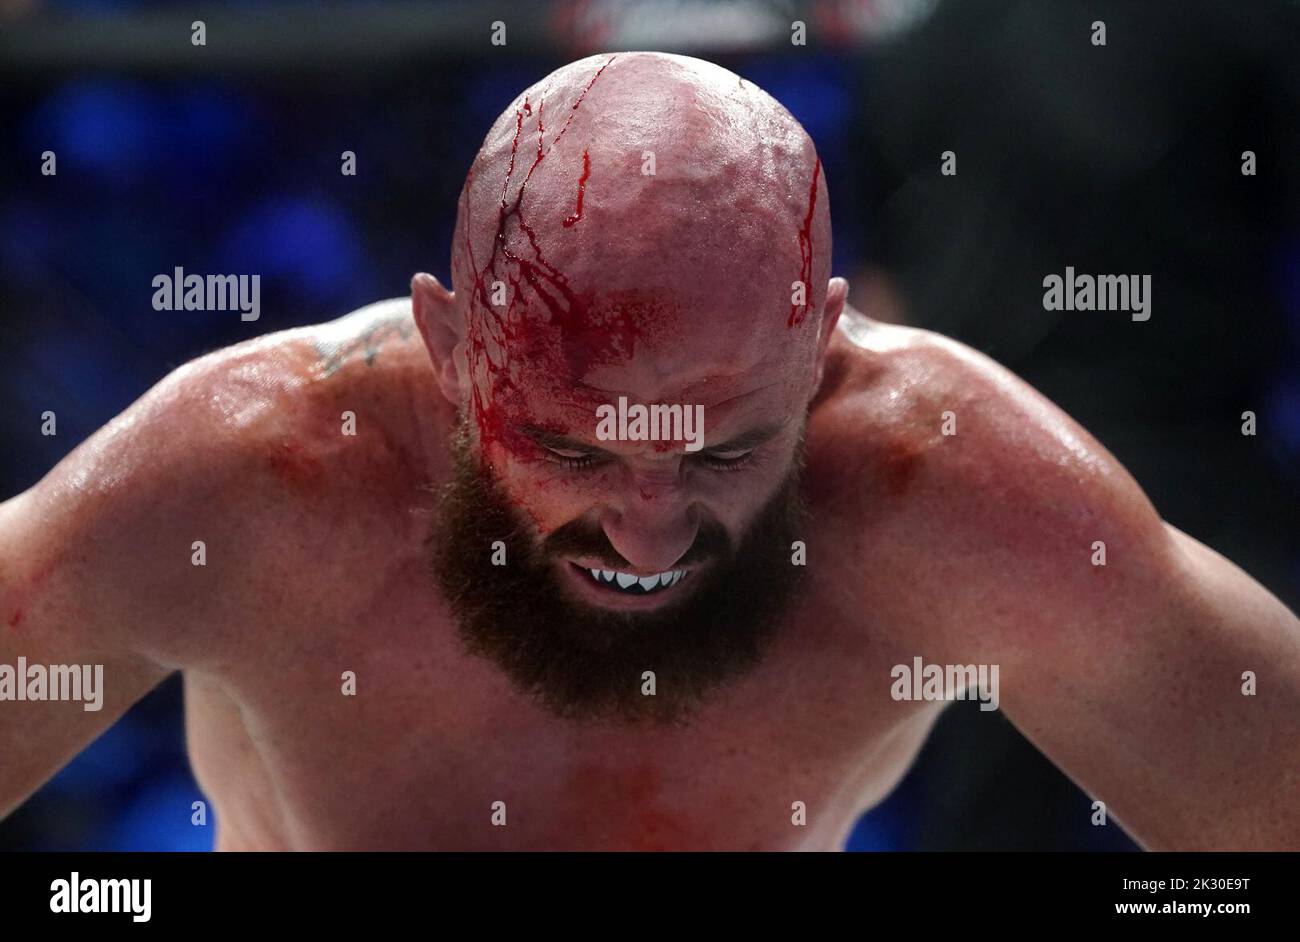 Peter Queally in action during their Welterweight bout during Bellator 385 at the 3 Arena, Dublin. Picture date: Friday September 23, 2022. Stock Photo